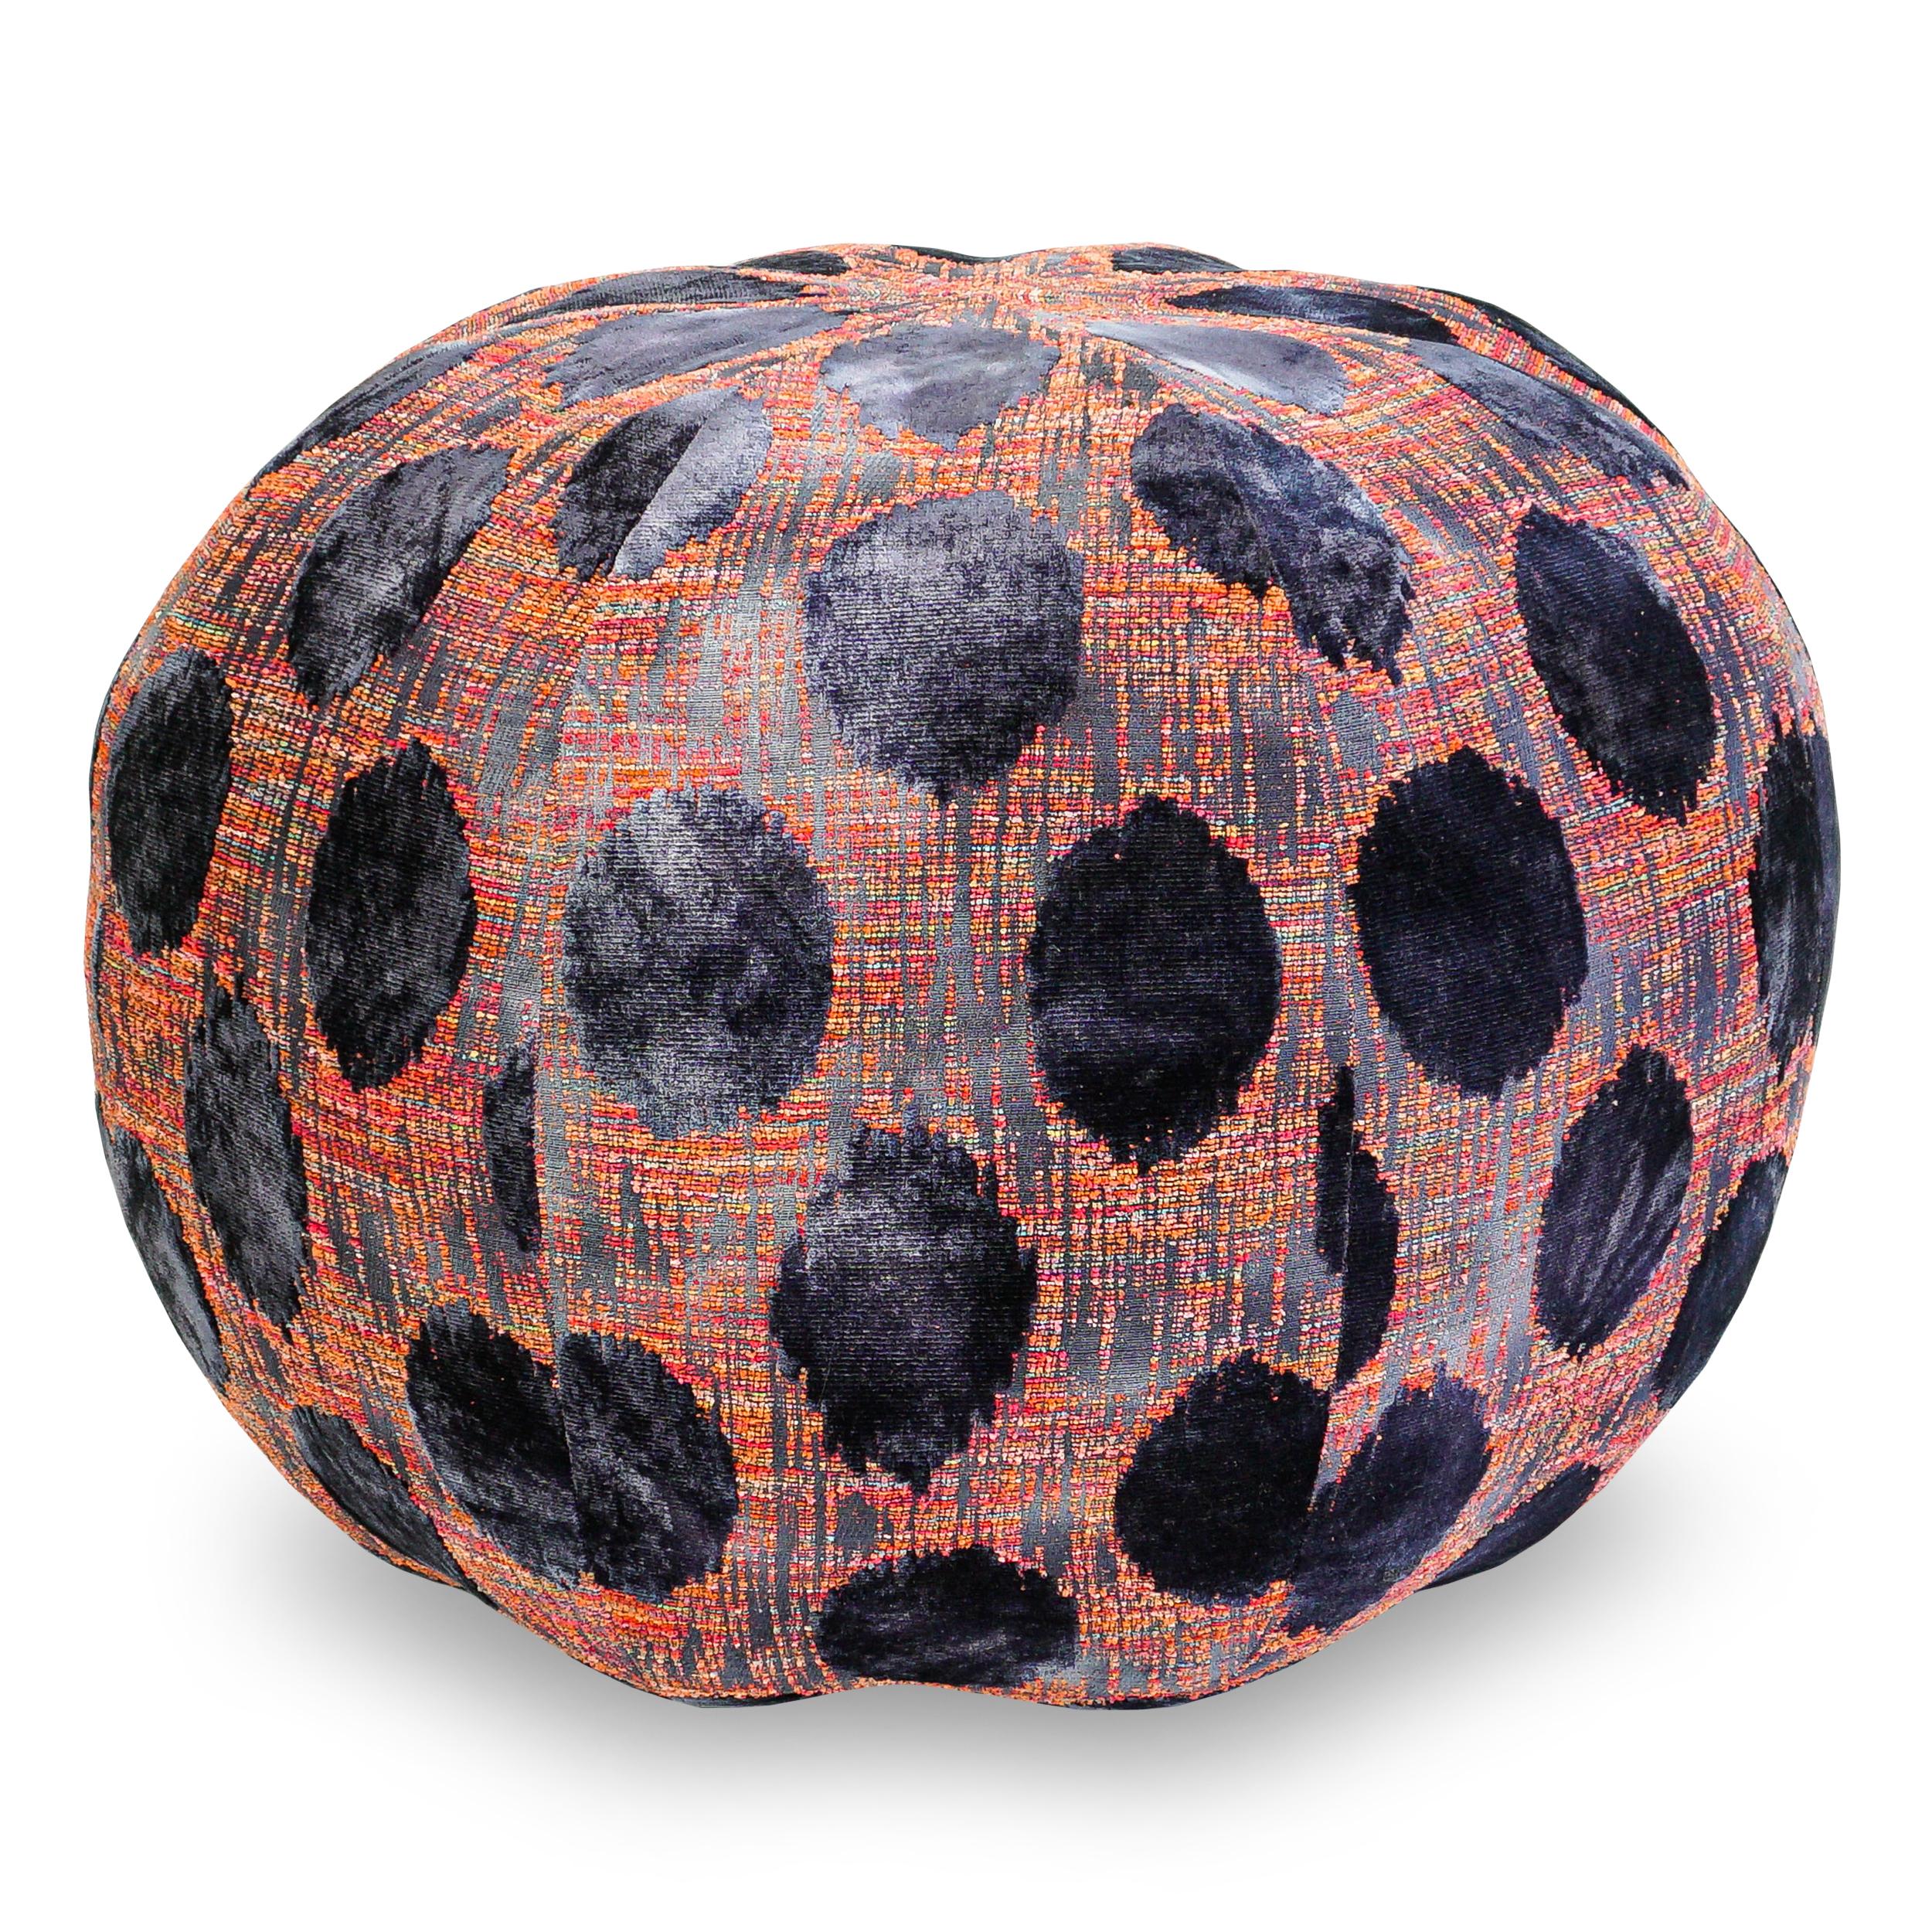 Giant pouf ottoman, sturdy enough to sit on or to support a small tray. Fabric is a traditional Turkish Dot design with a modern twist. A contrasting boucle ground features lusciously soft velvet spots. Can be customized in any